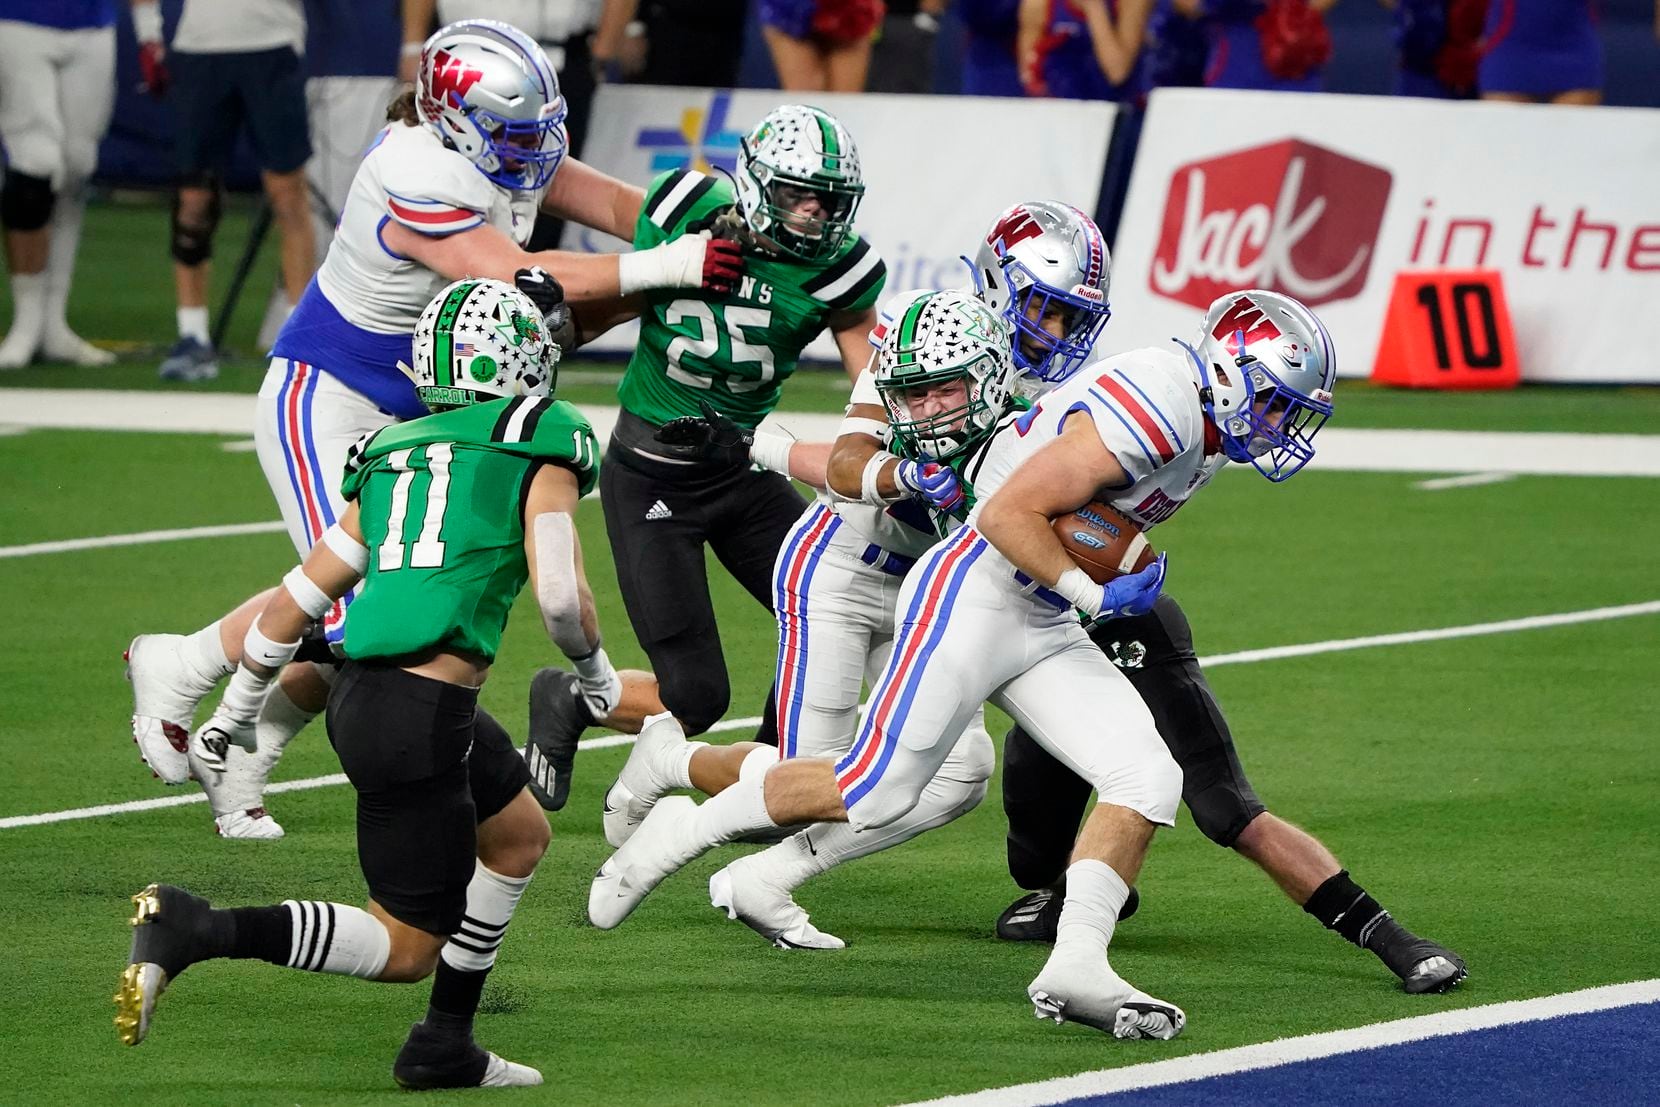 Austin Westlake running back Grey Nakfoor (22) scores on a touchdown run past Southlake Carroll defensive back Josh Spaeth (11) during the fourth quarter of the Class 6A Division I state football championship game at AT&T Stadium on Saturday, Jan. 16, 2021, in Arlington, Texas. Westlake won the game 52-34.